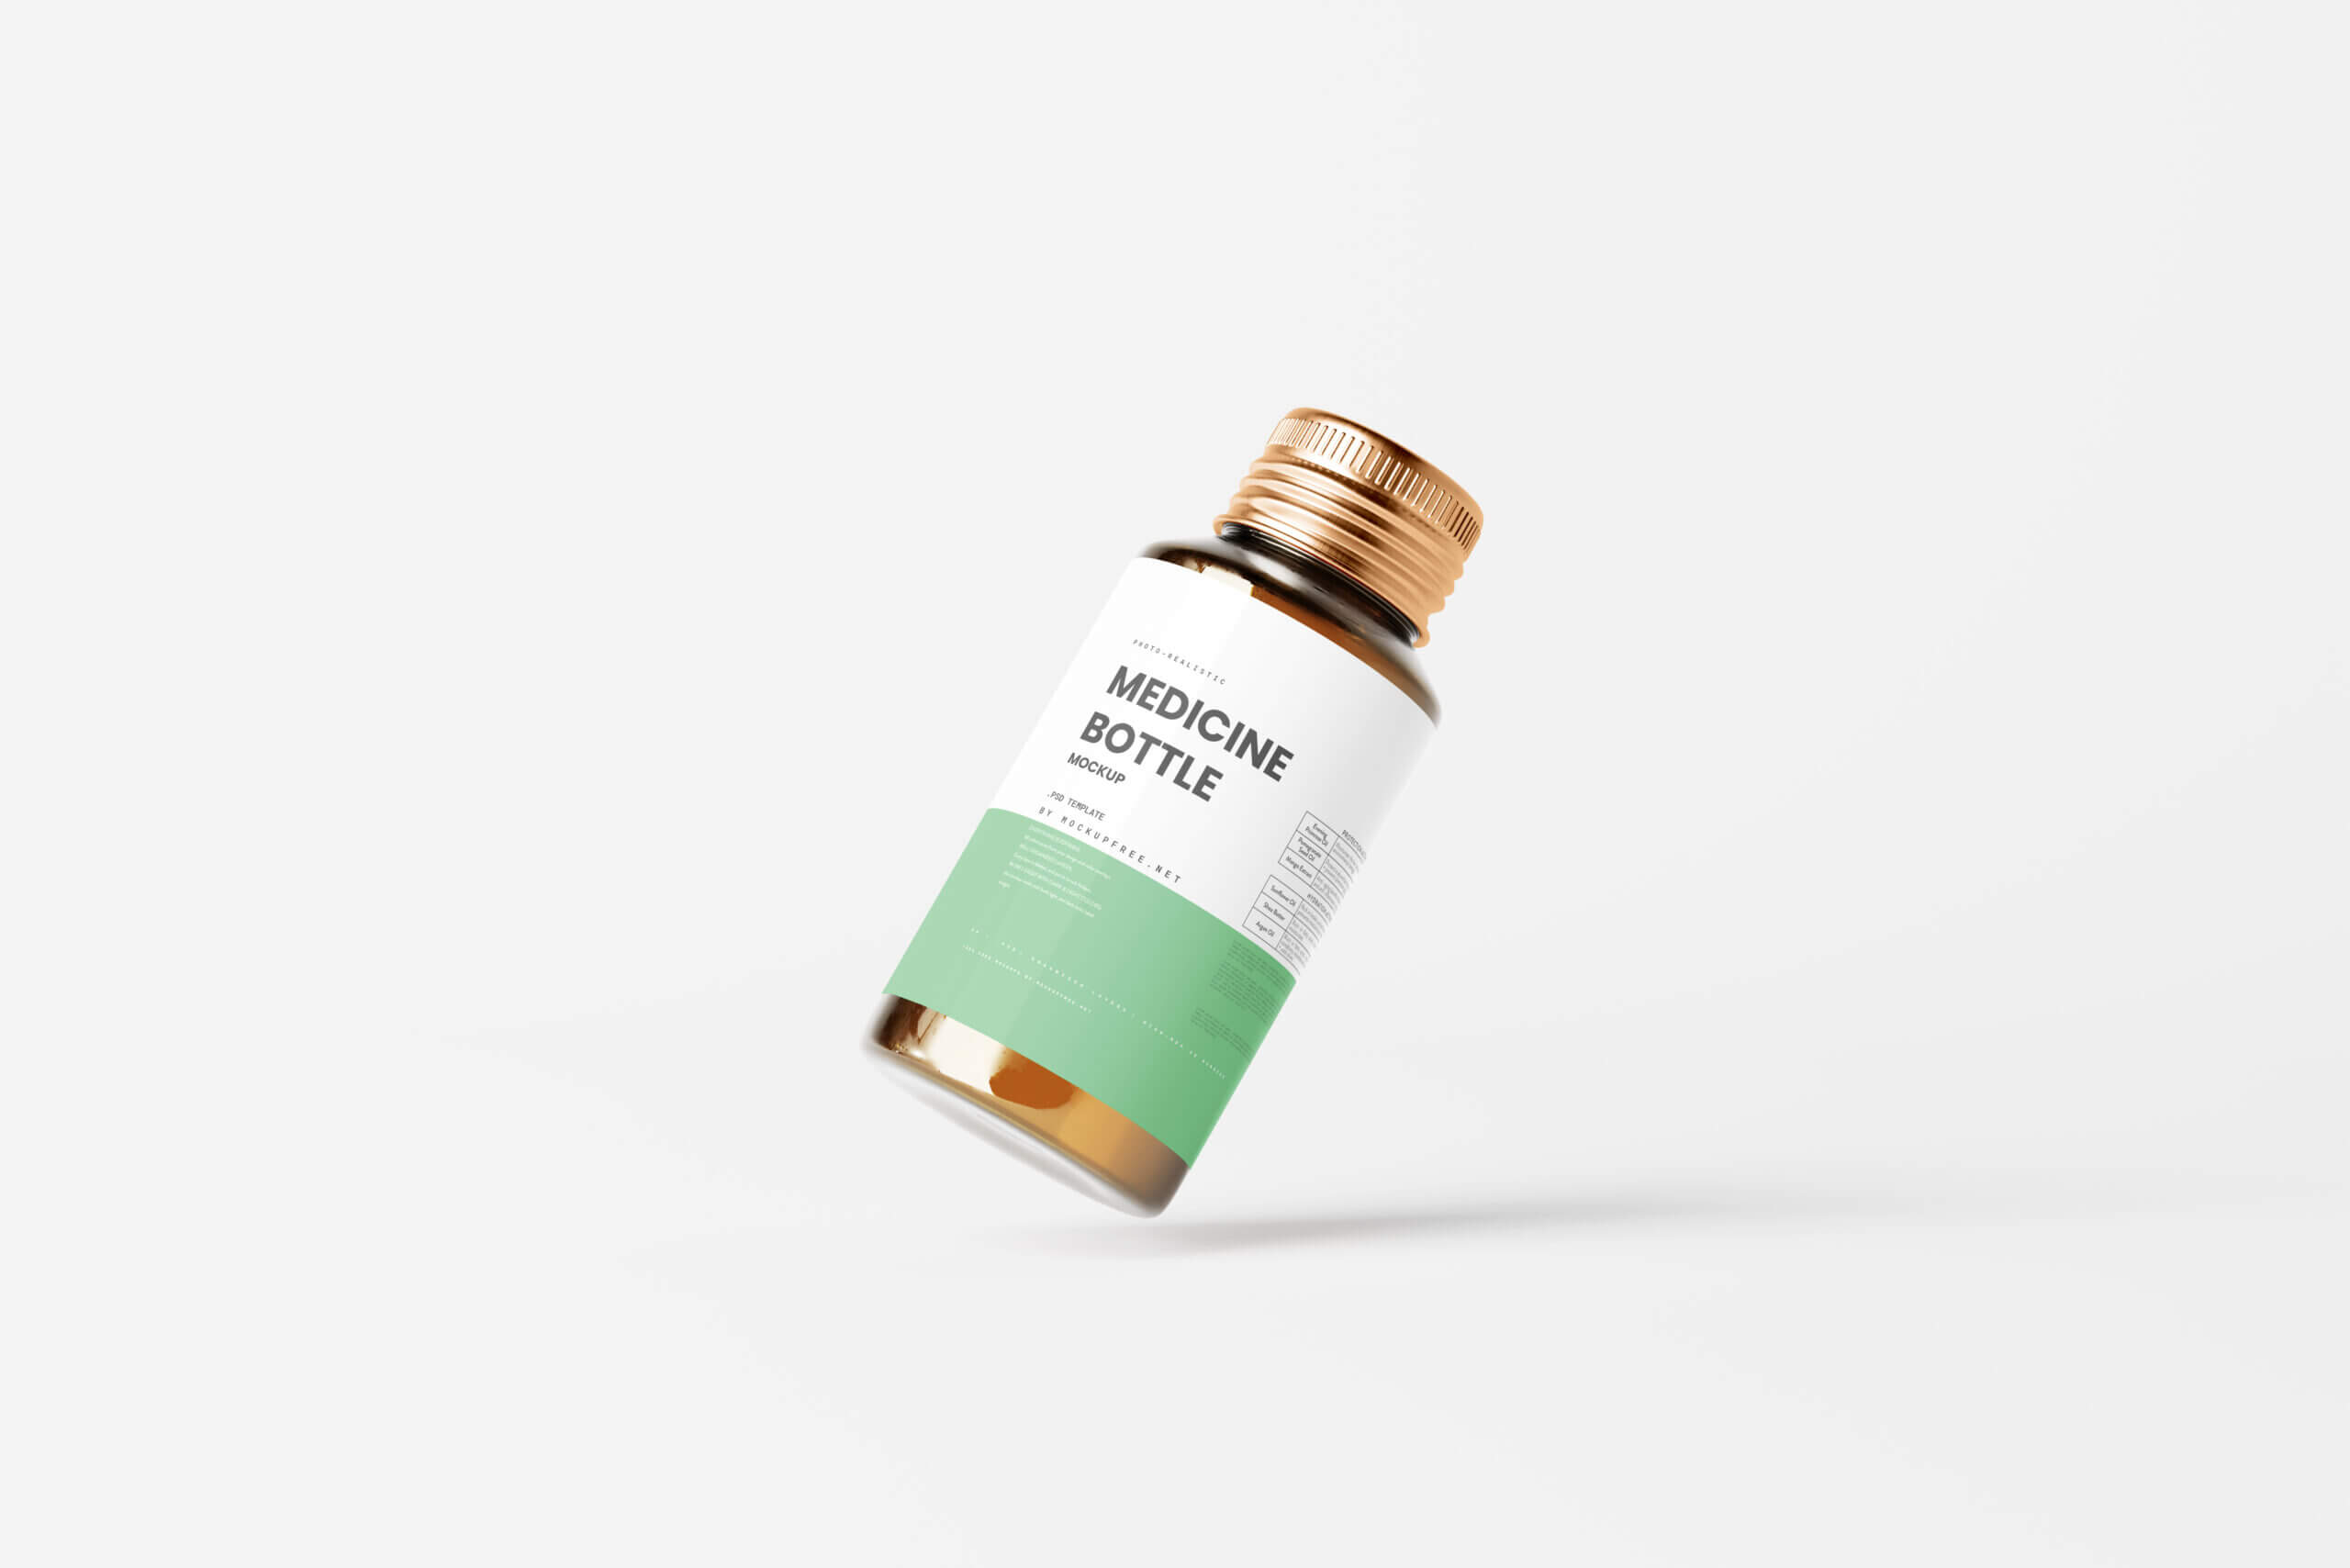 10 Free Amber Medicine Bottle With Box Mockup PSD Files6